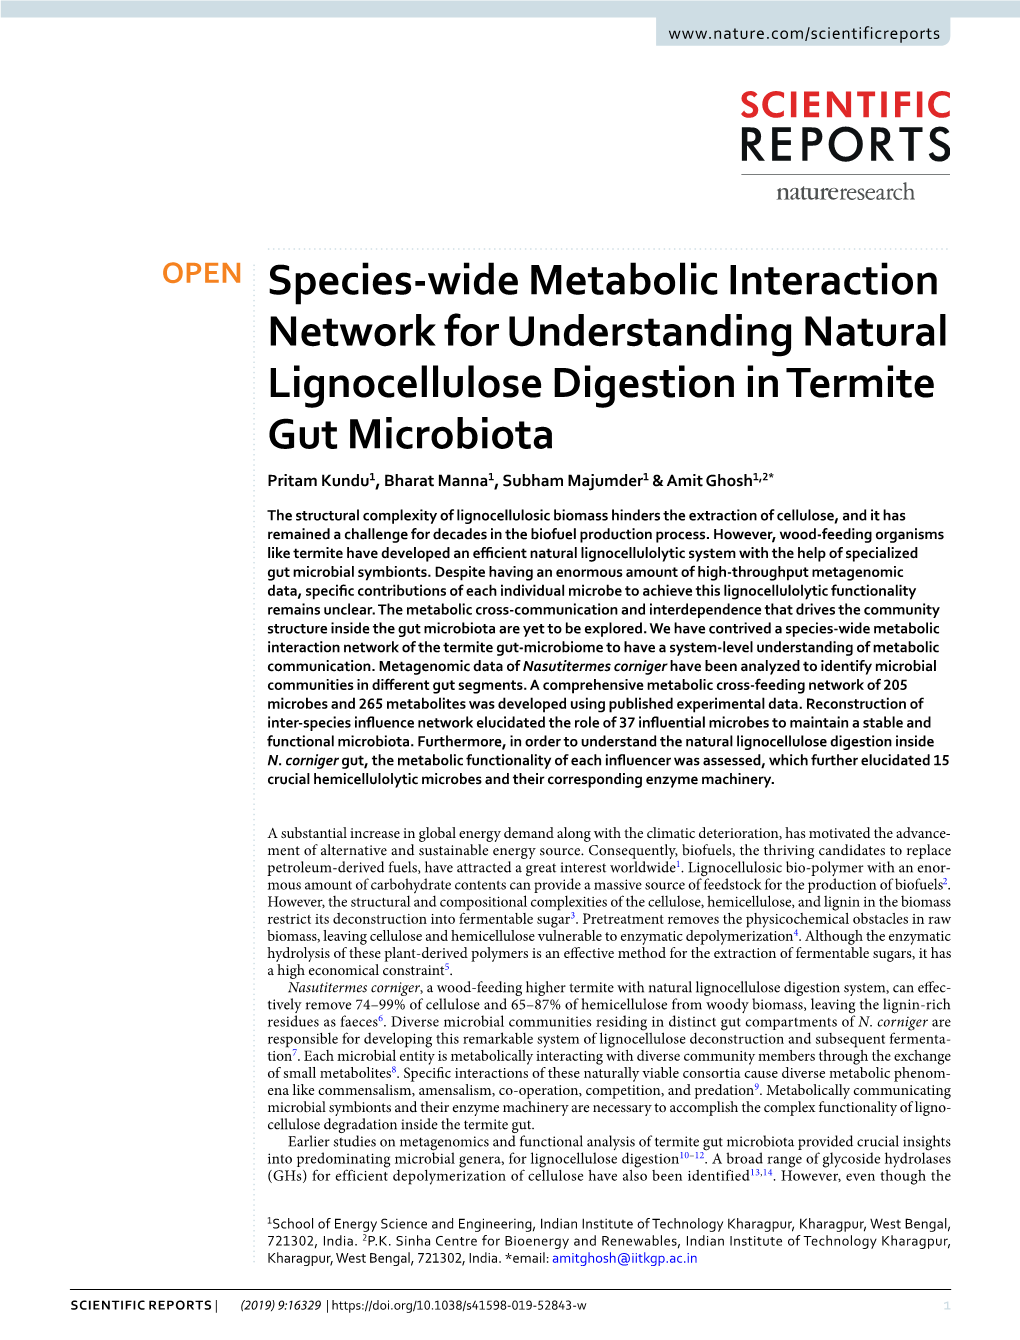 Species-Wide Metabolic Interaction Network for Understanding Natural Lignocellulose Digestion in Termite Gut Microbiota